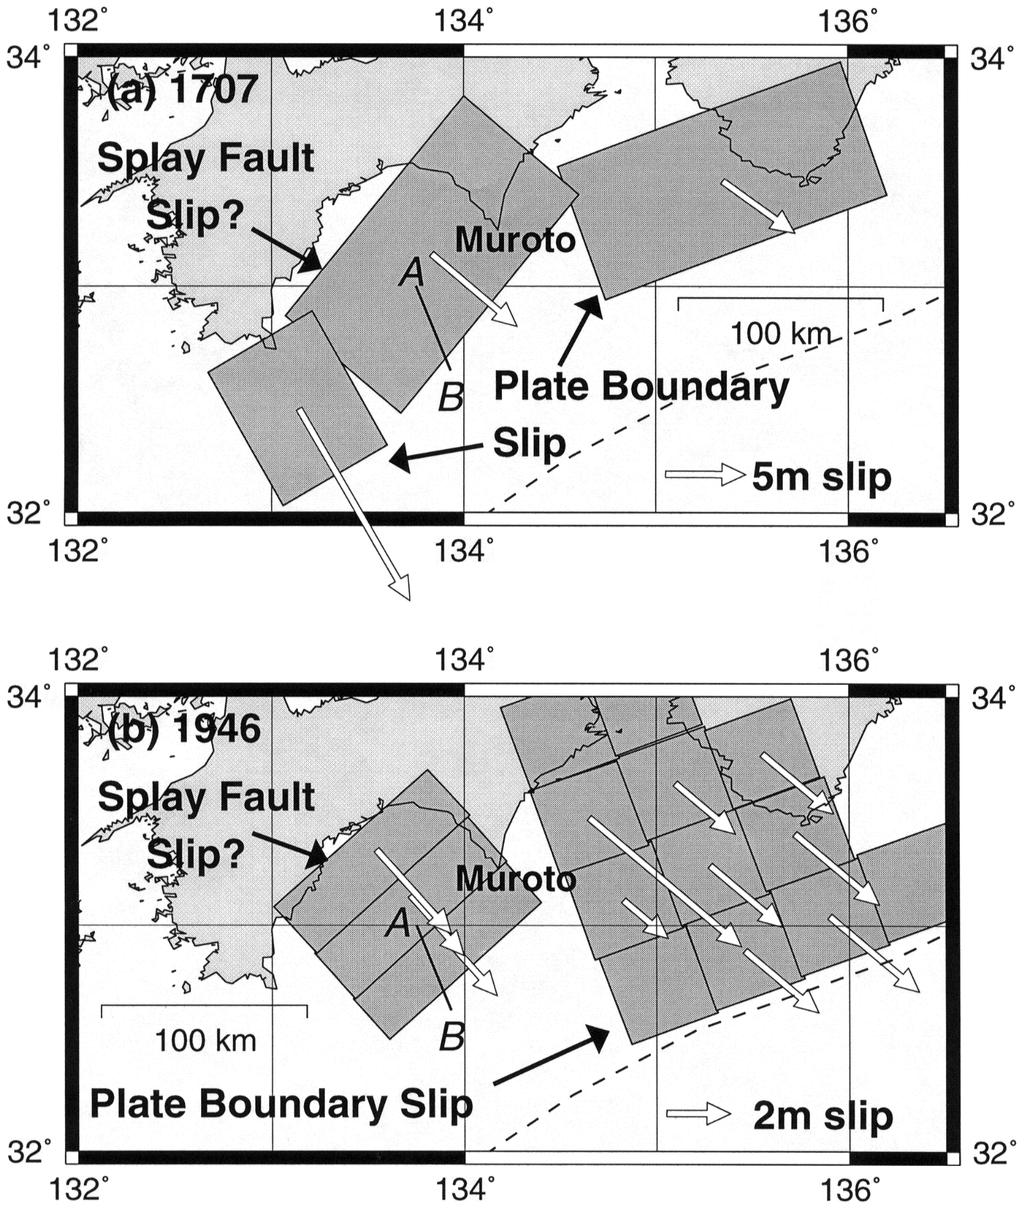 244 P. R. CUMMINS et al.: SPLAY FAULT AND EARTHQUAKE SLIP IN THE NANKAI TROUGH Fig. 1. (a) The fault slip model for the 1707 Hoei earthquake obtained by Aida (1981) from tsunami modeling.